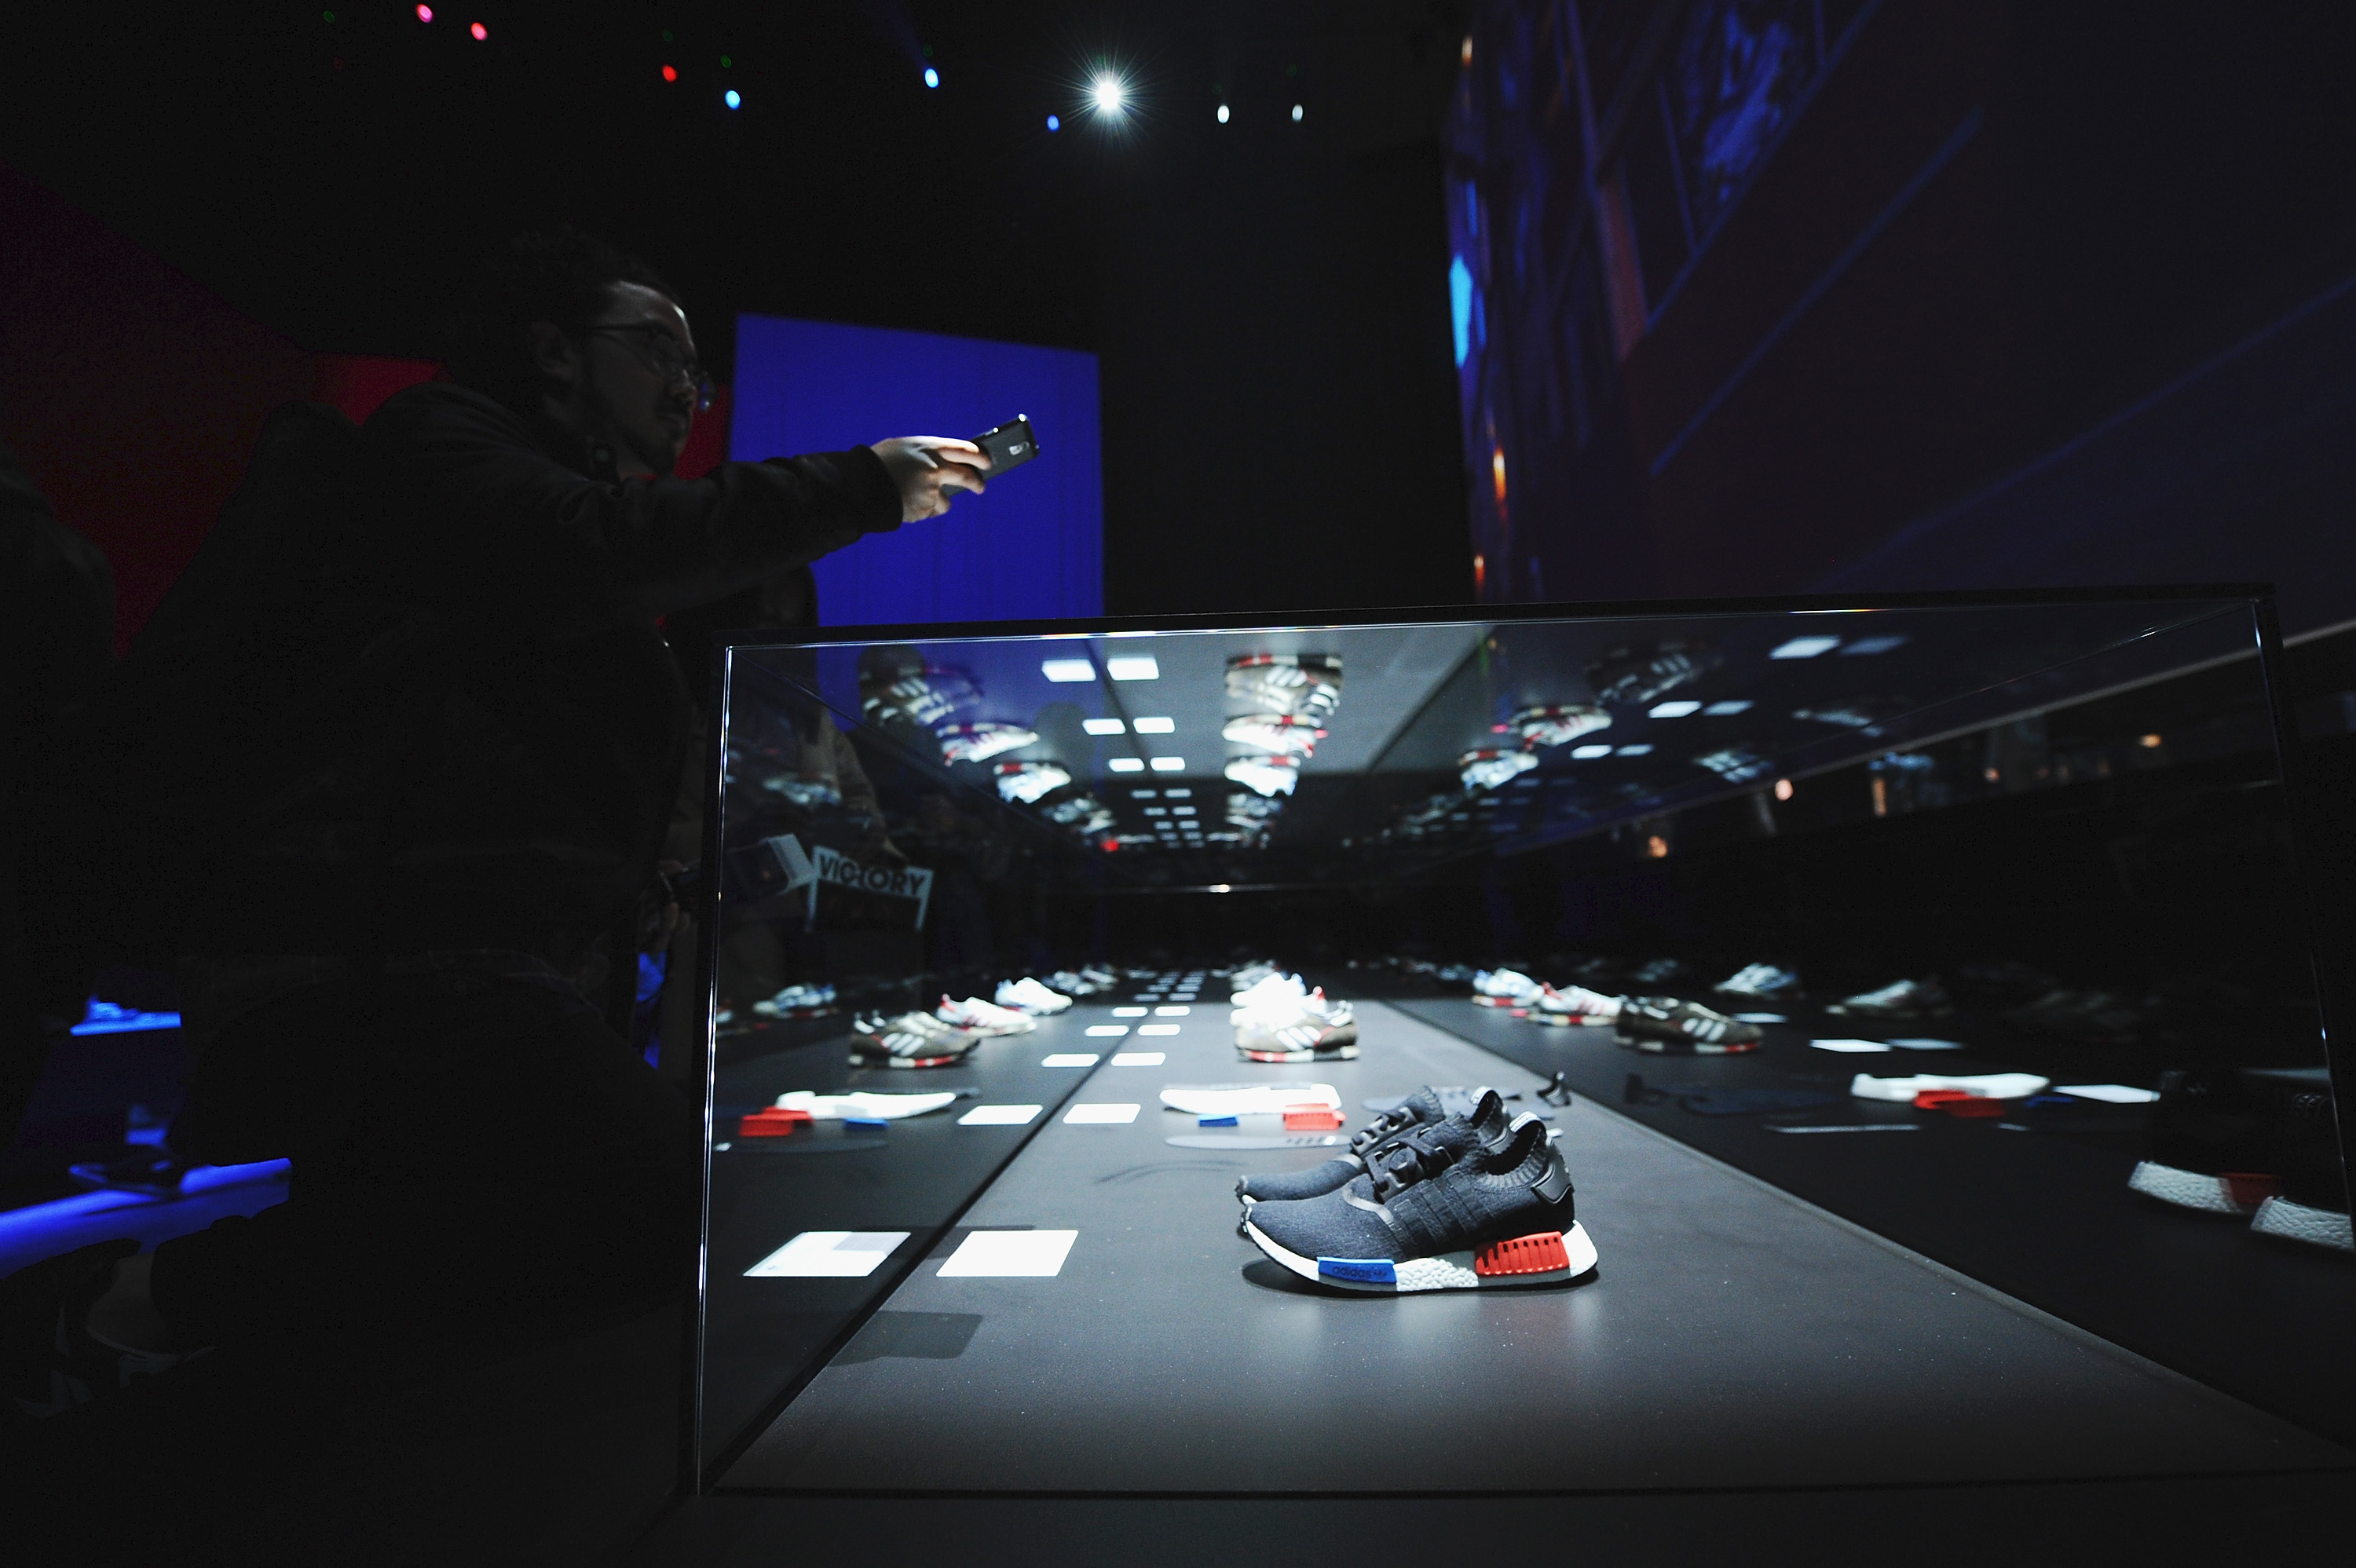 NEW YORK, NY - DECEMBER 09: A general view of atmosphere at the adidas Originals NMD global unveiling at the 69th Regiment Armory on December 9, 2015 in New York City. #NMD, #adidasOriginals (Photo by Ilya S. Savenok/Getty Images for adidas)